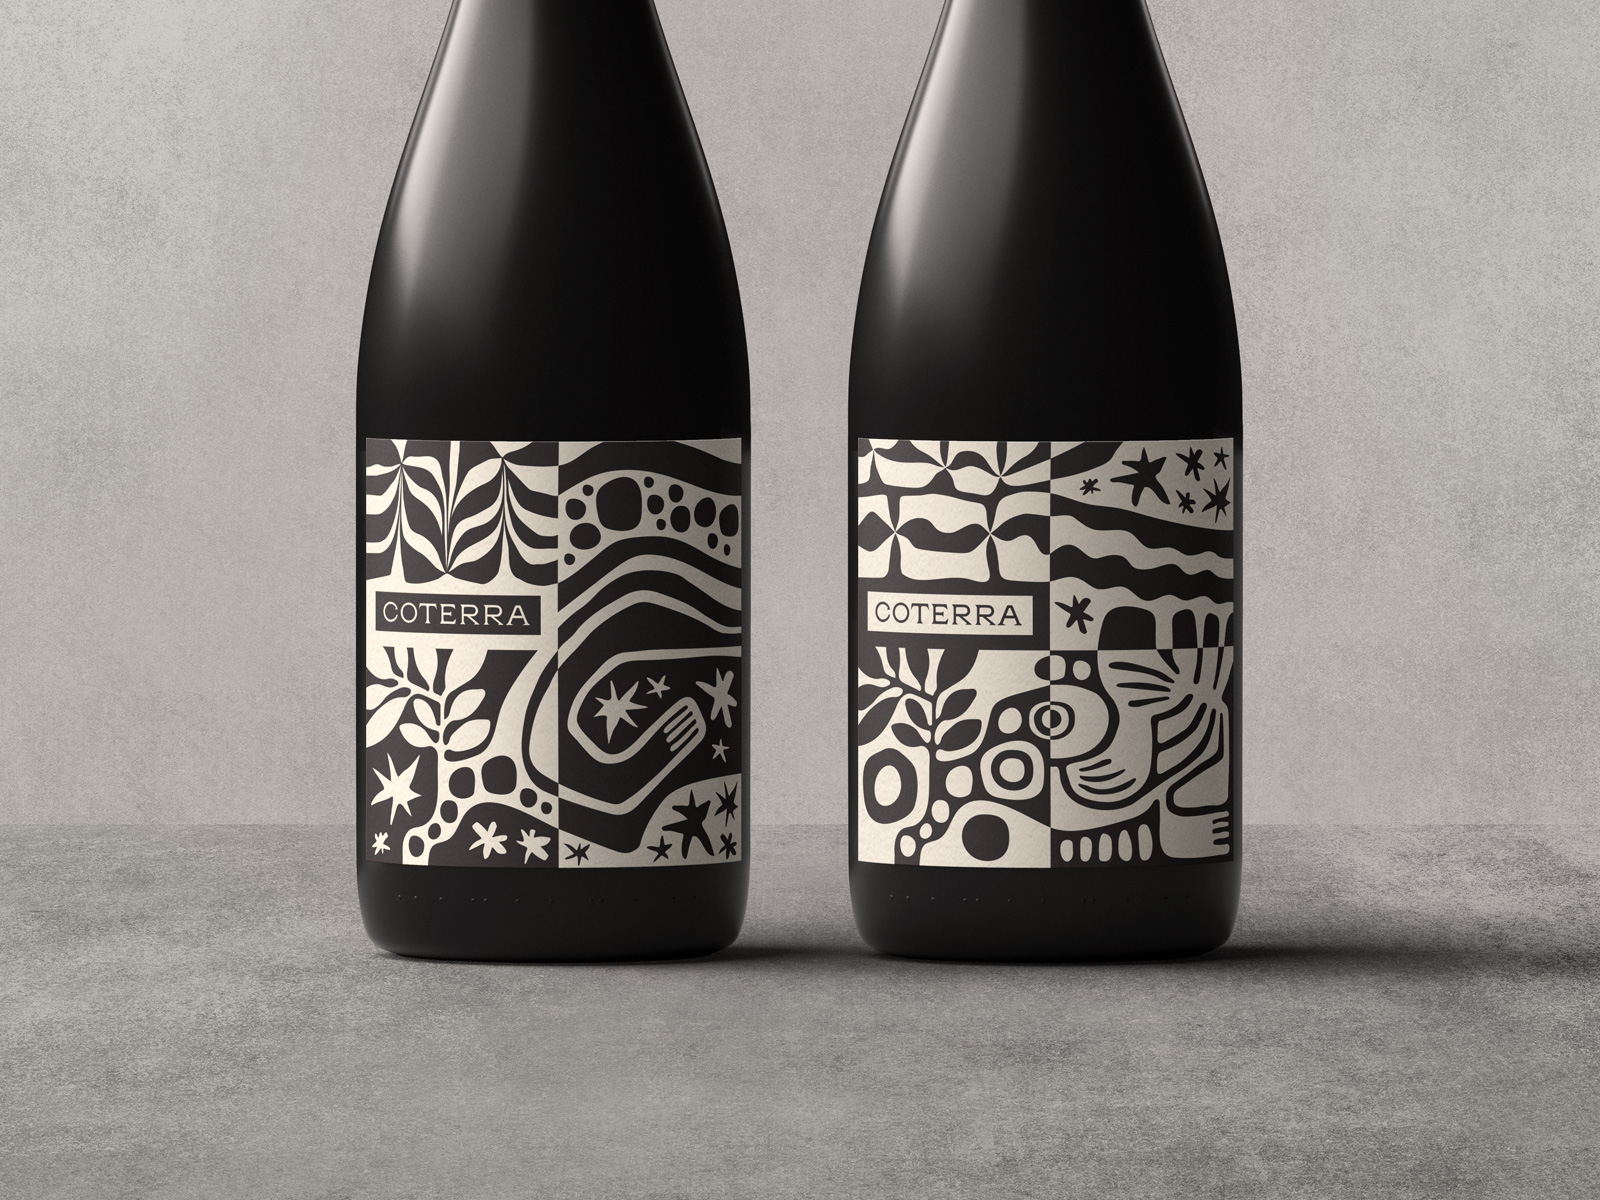 Coterra’s Trippy Label and Cork Design Makes the Practice of Opening a Bottle Feel Like Art